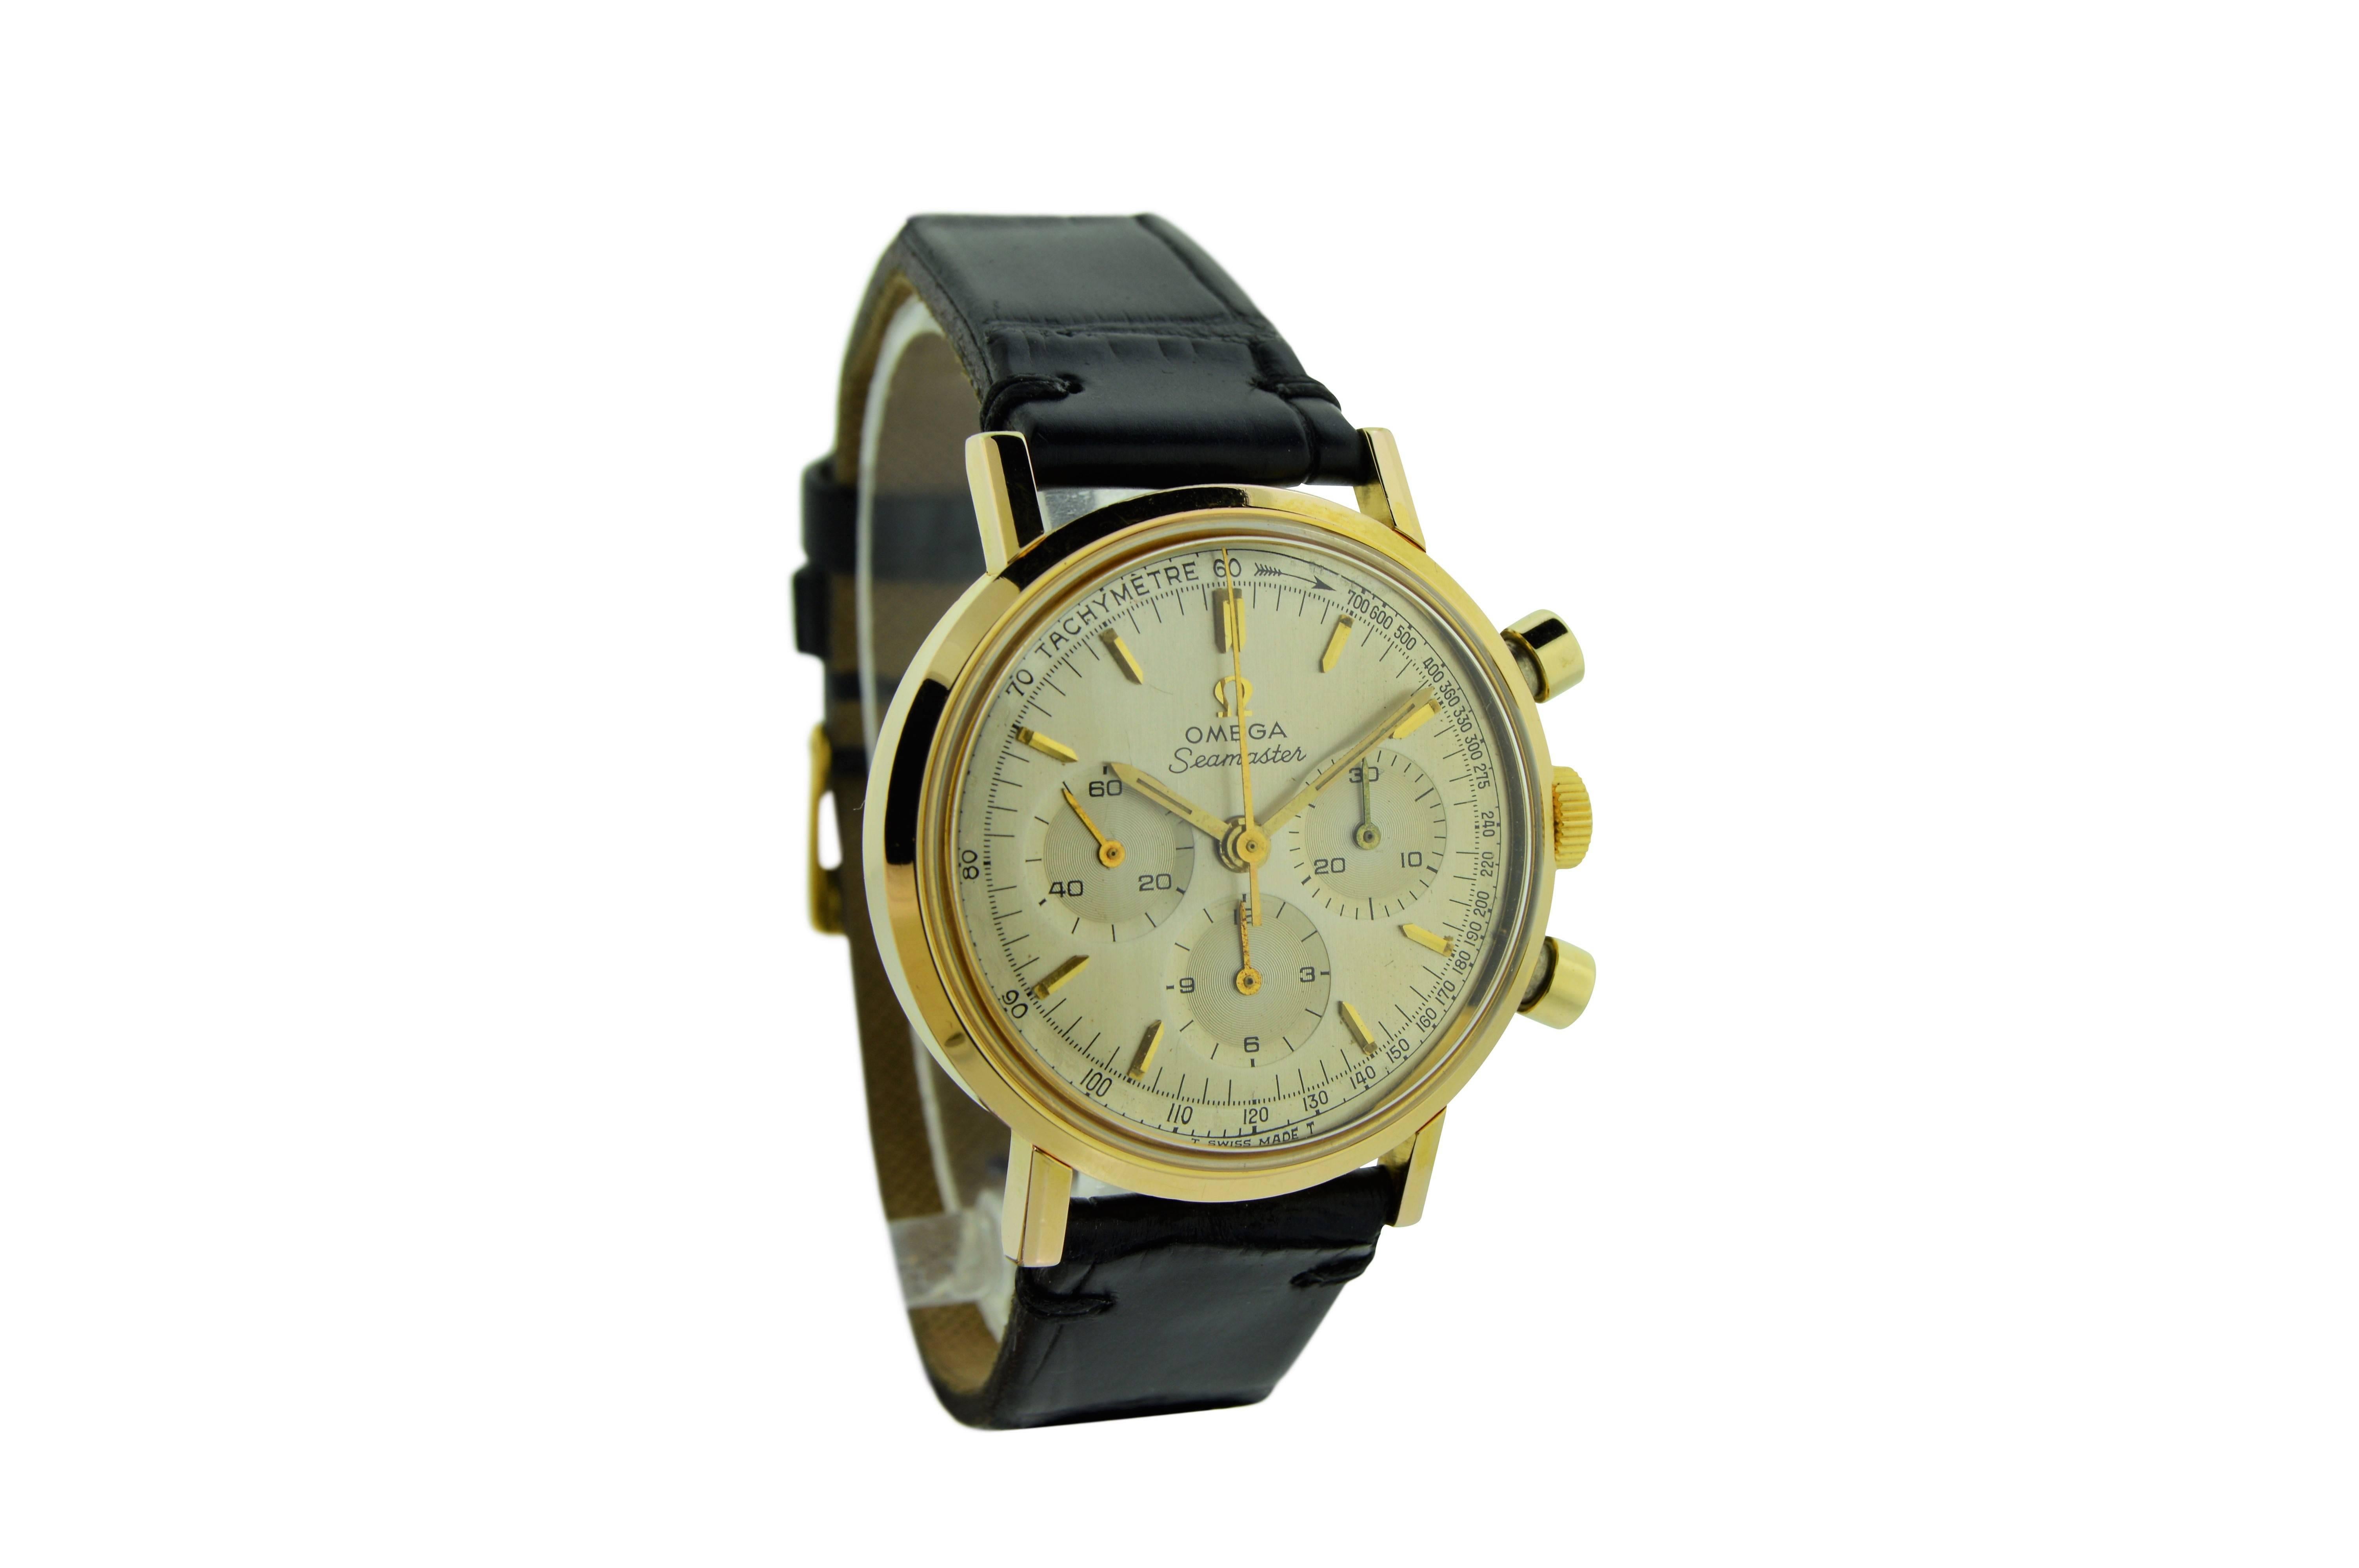 FACTORY / HOUSE: Omega Watch Company
STYLE / REFERENCE: Classic Round / 
METAL / MATERIAL: Yellow Gold Filled
DIMENSIONS: 41mm X 35mm
CIRCA: 1960's
MOVEMENT / CALIBER: Manual Winding / 17 Jewels / Cal. 321
DIAL / HANDS: Original Silvered with Baton